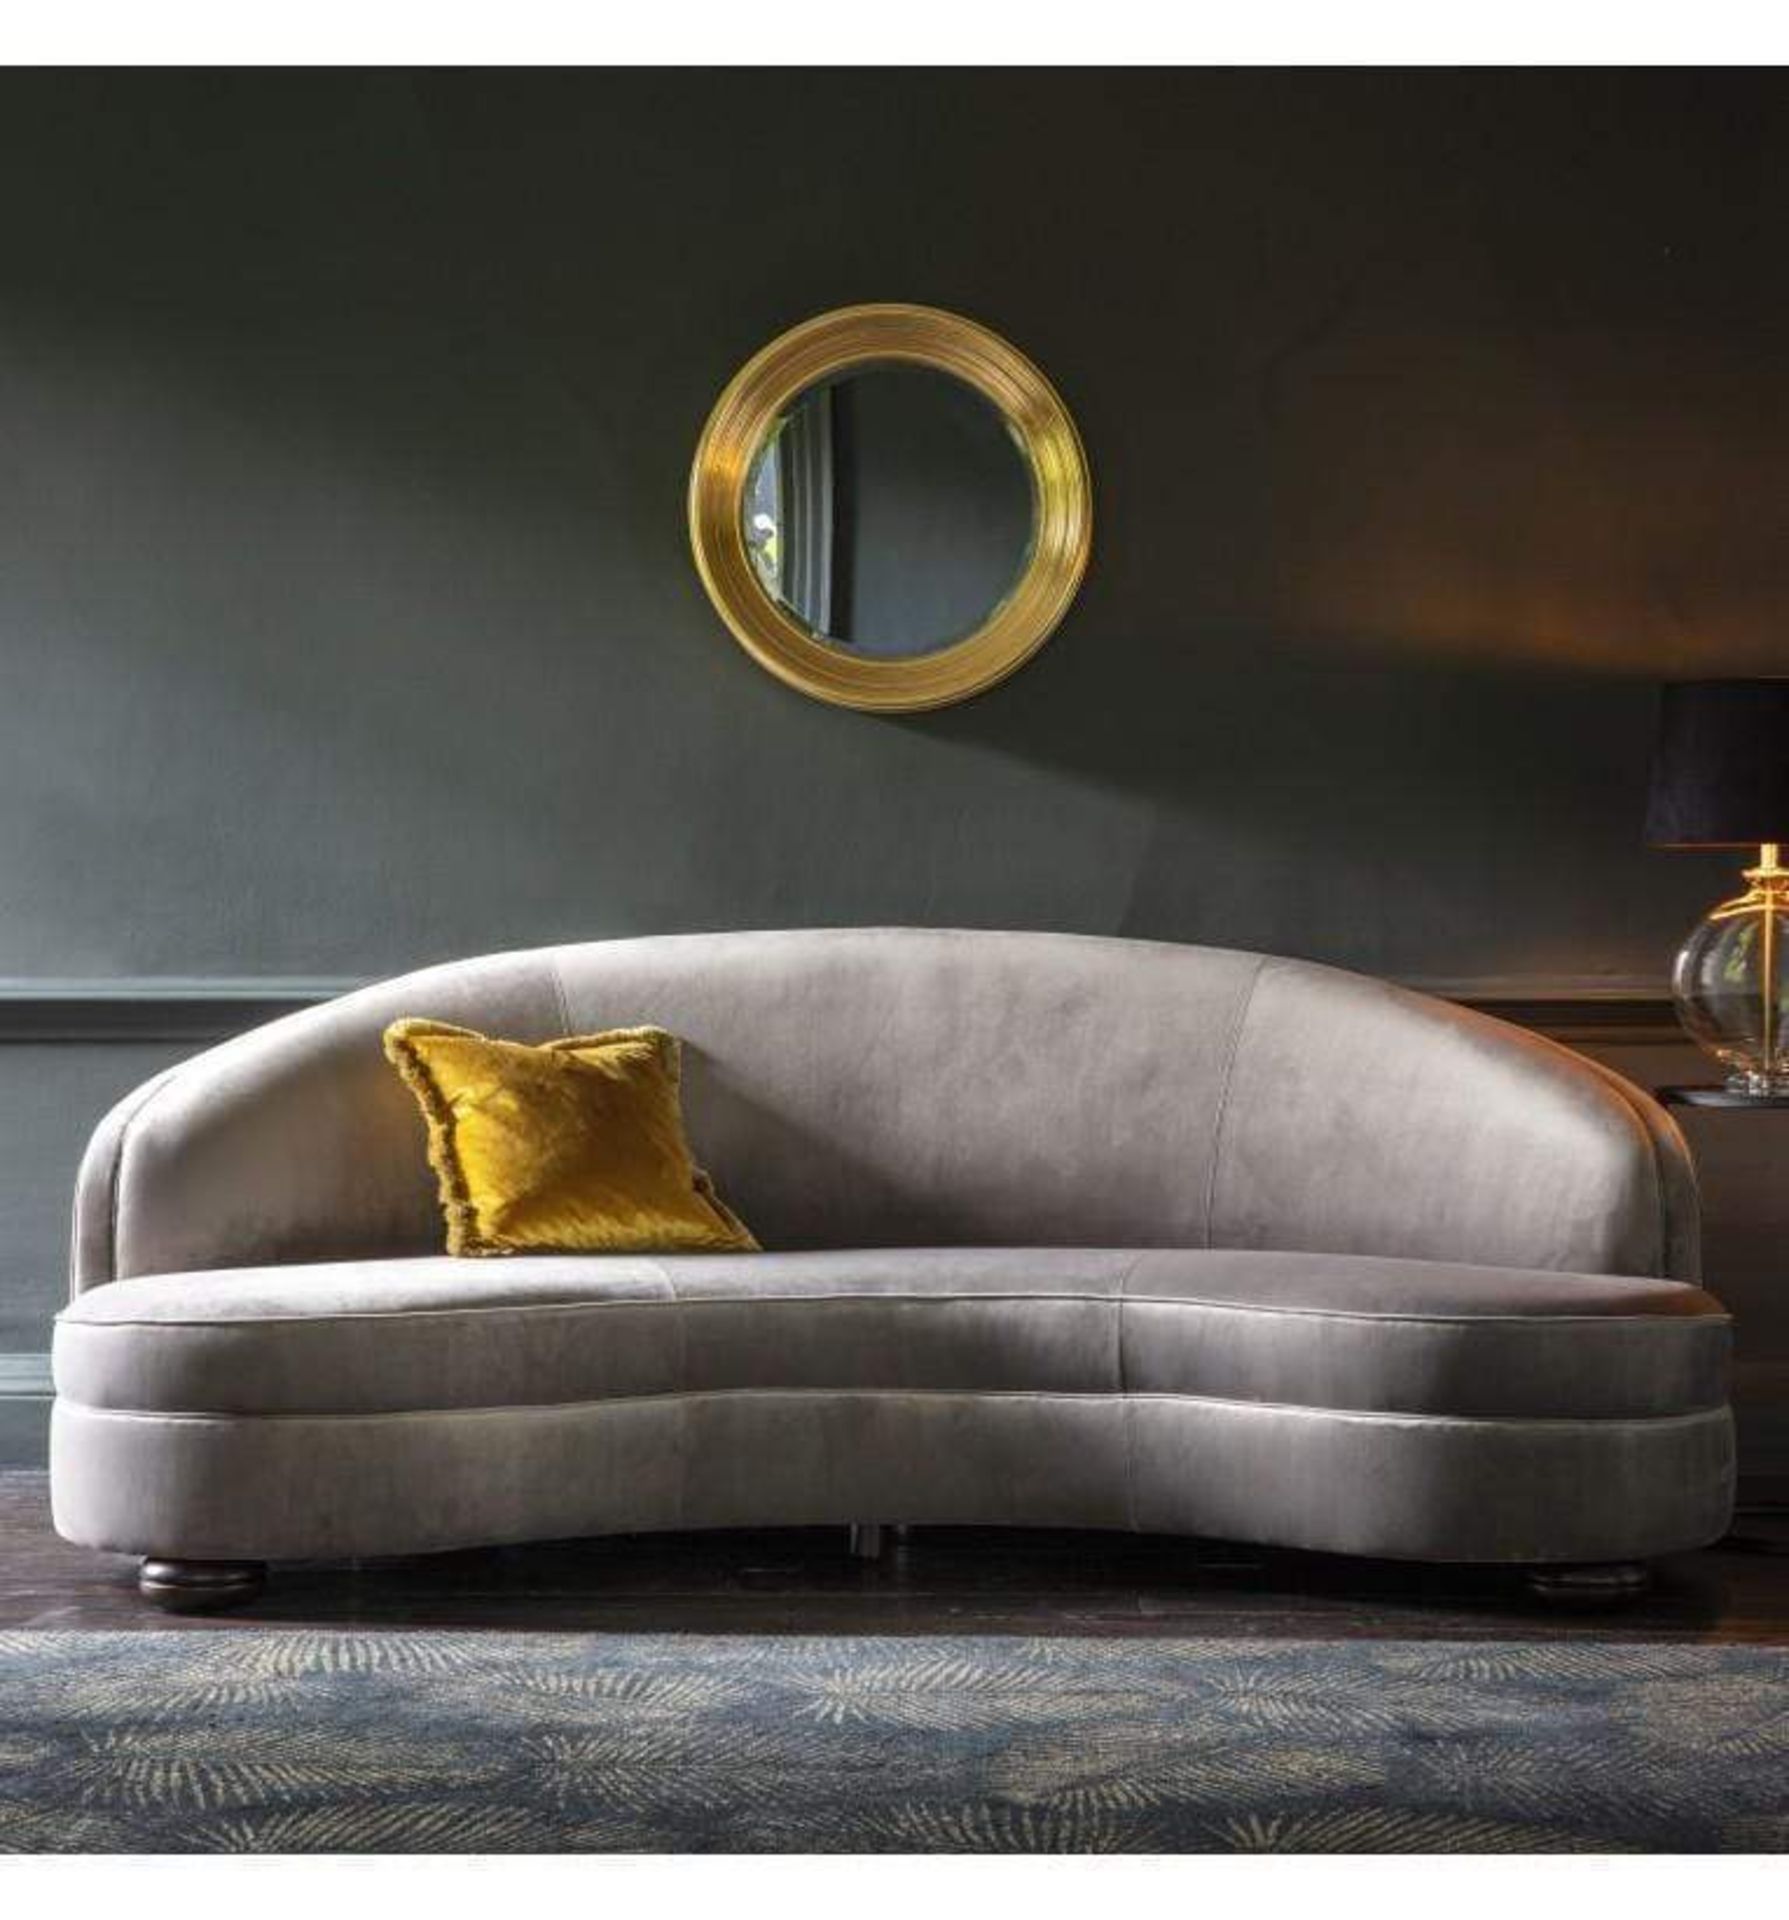 Sanza Sofa Grey Velvet The Sanza Sofa is the latest addition to our range of modern and contemporary